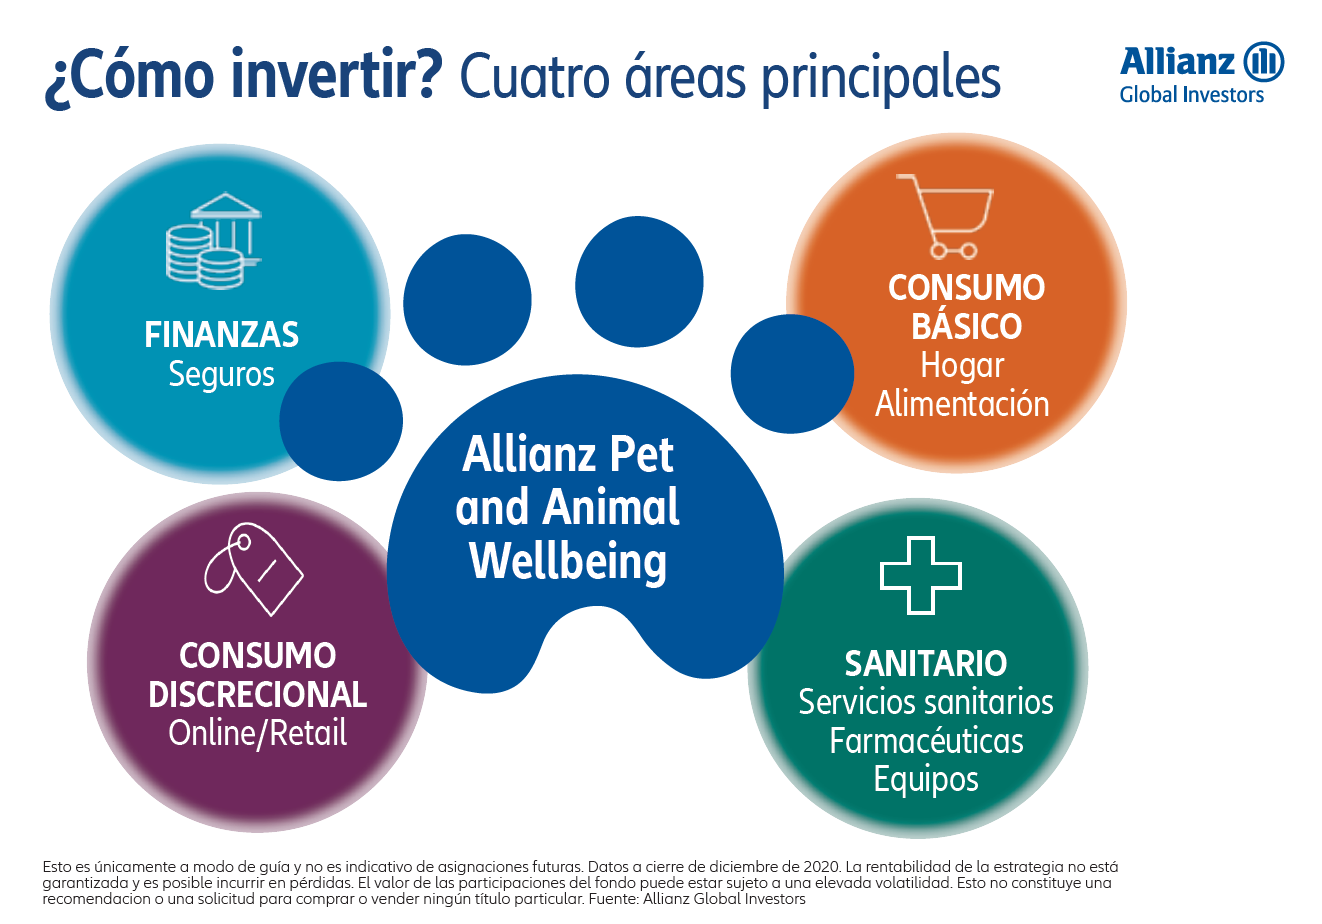 Allianz Pet and Animal Wellbeing